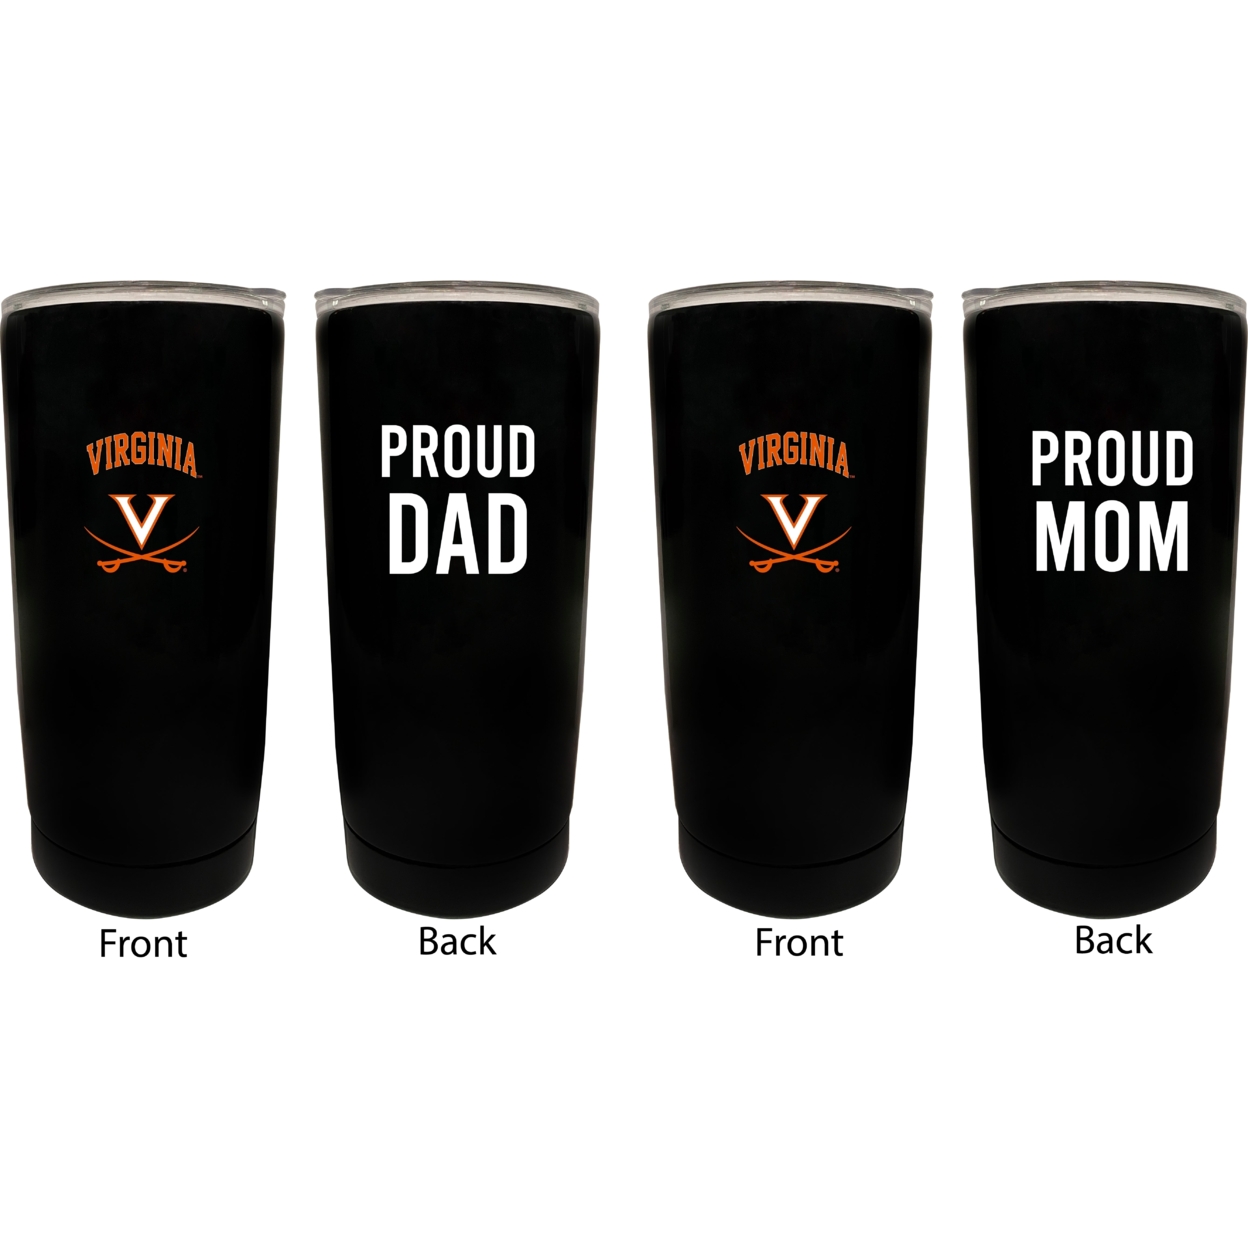 Virginia Cavaliers Proud Mom And Dad 16 Oz Insulated Stainless Steel Tumblers 2 Pack Black.